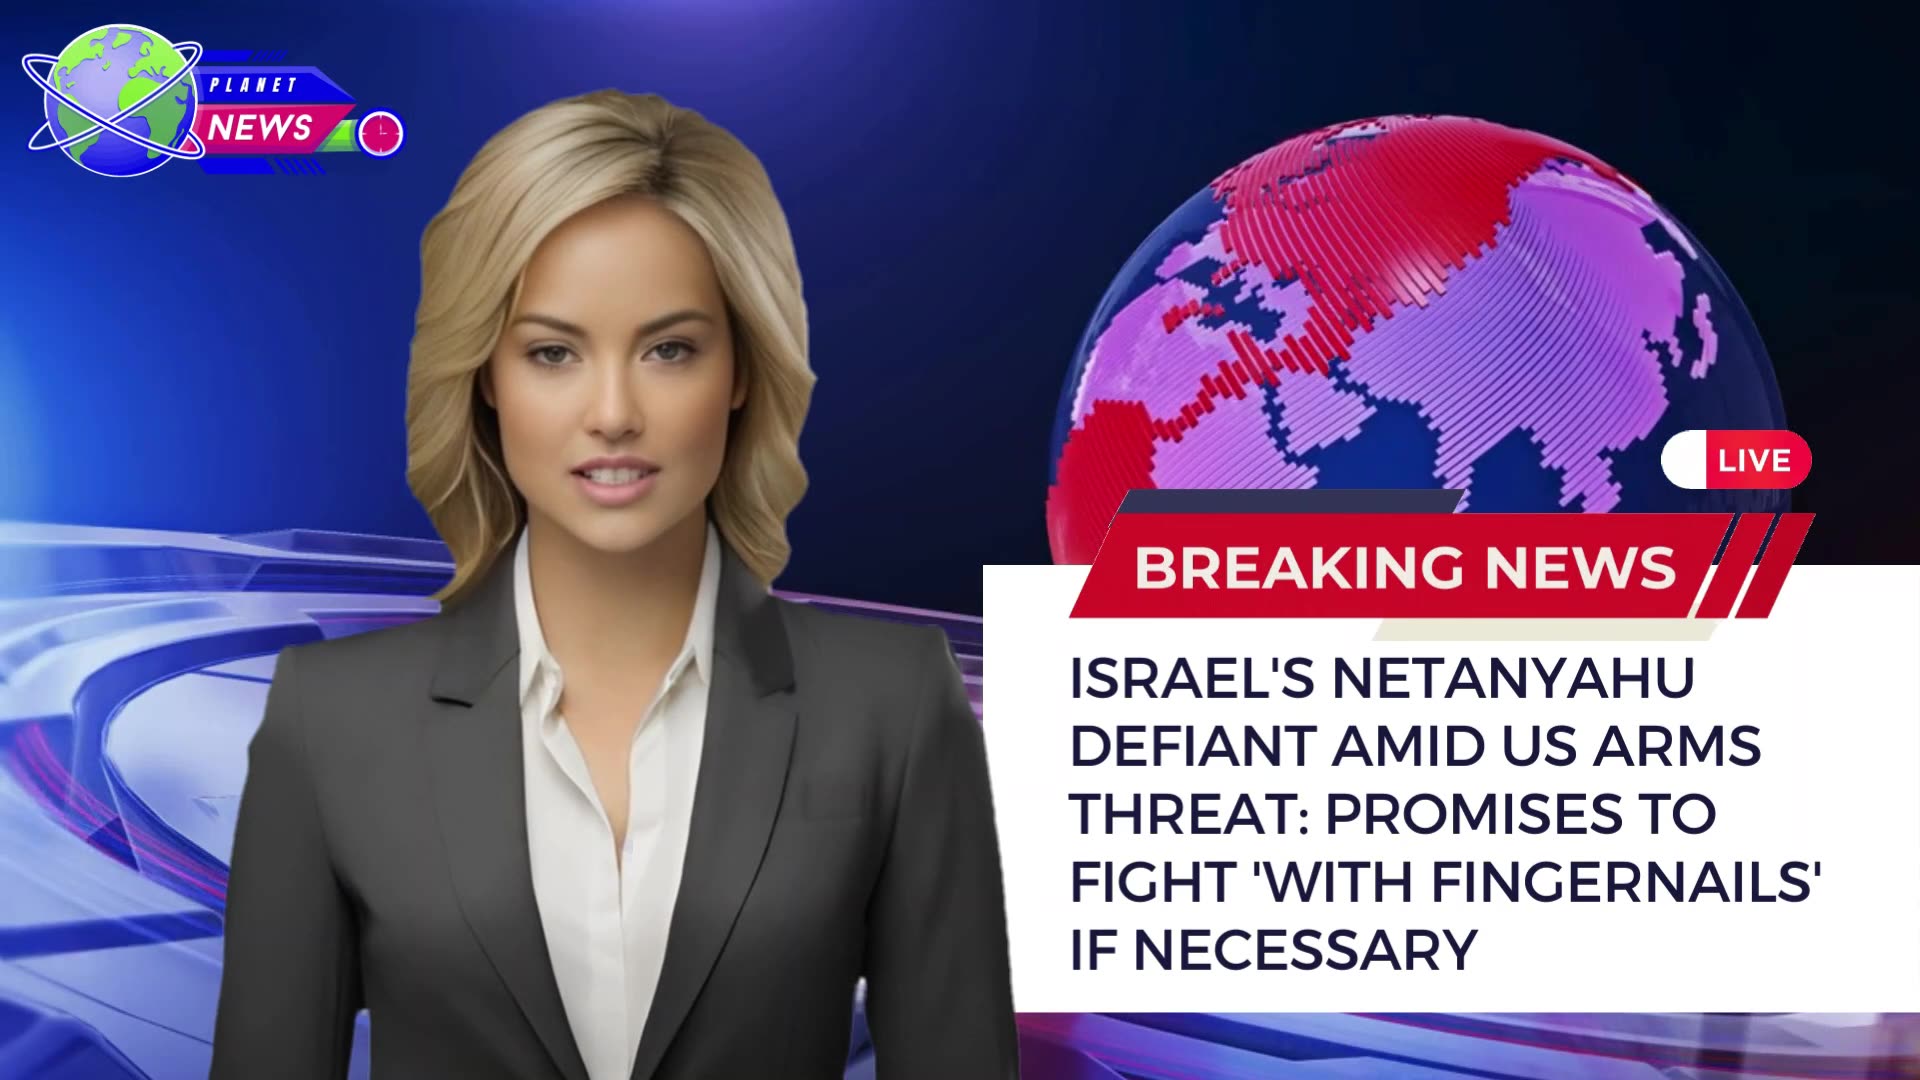 Israel's Netanyahu Defiant Amid US Arms Threat Promises to Fight 'With Fingernails' if Necessary